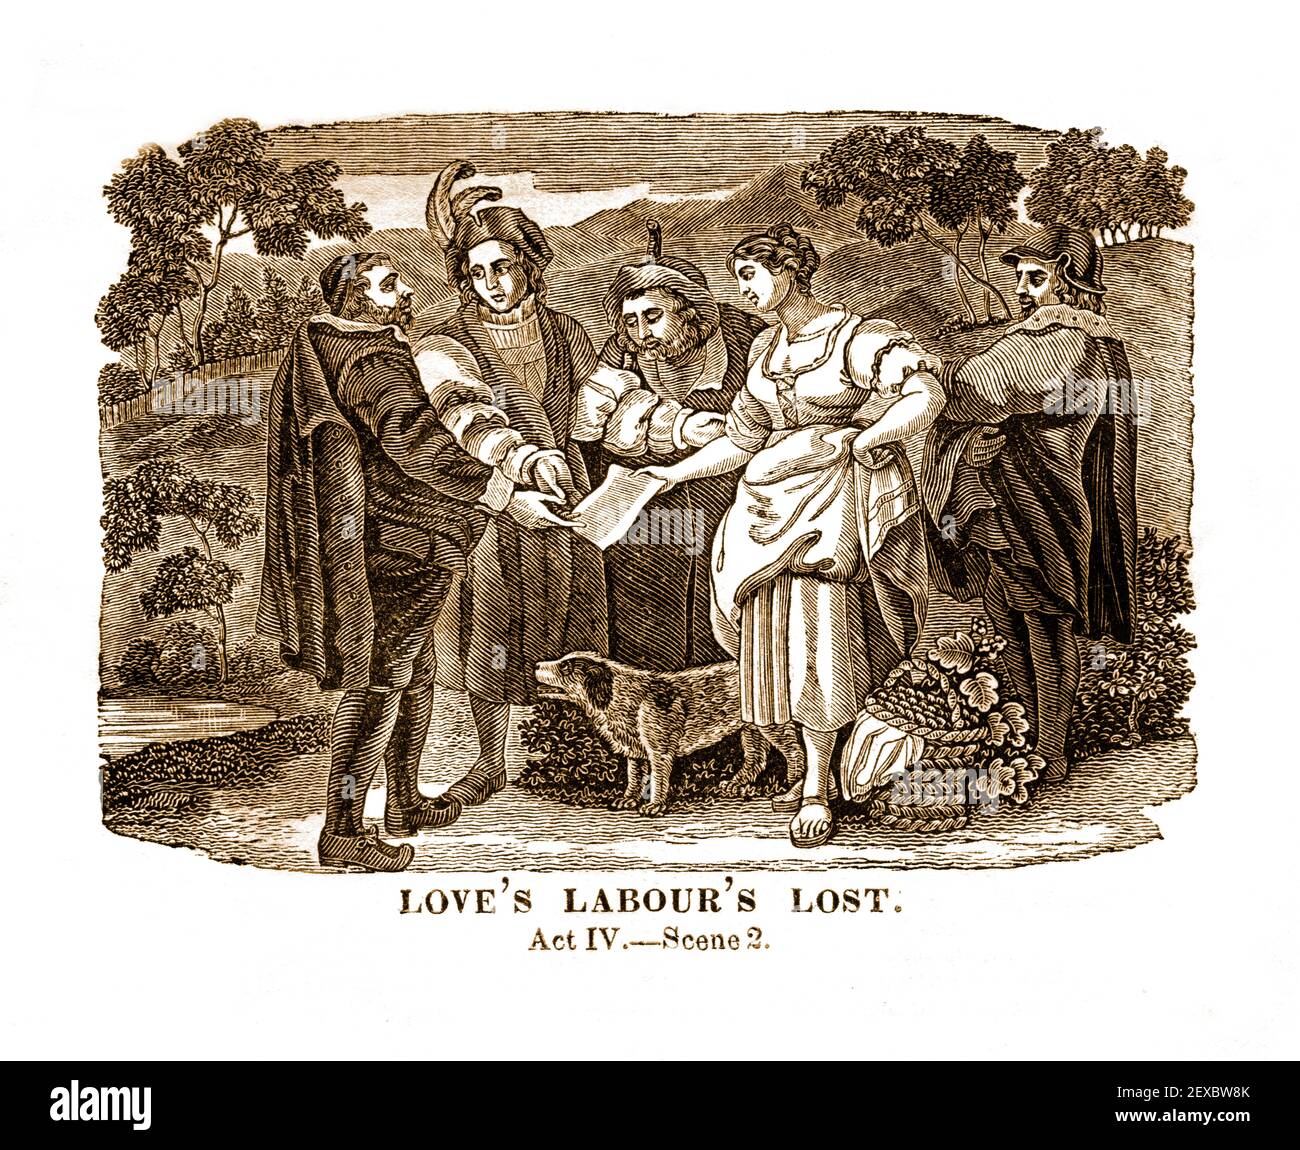 An 1834 engraving depicting a scene (Act IV Scene 2) from William Shakespeare's play, 'Love's Labour's Lost', digitally colorized. Stock Photo